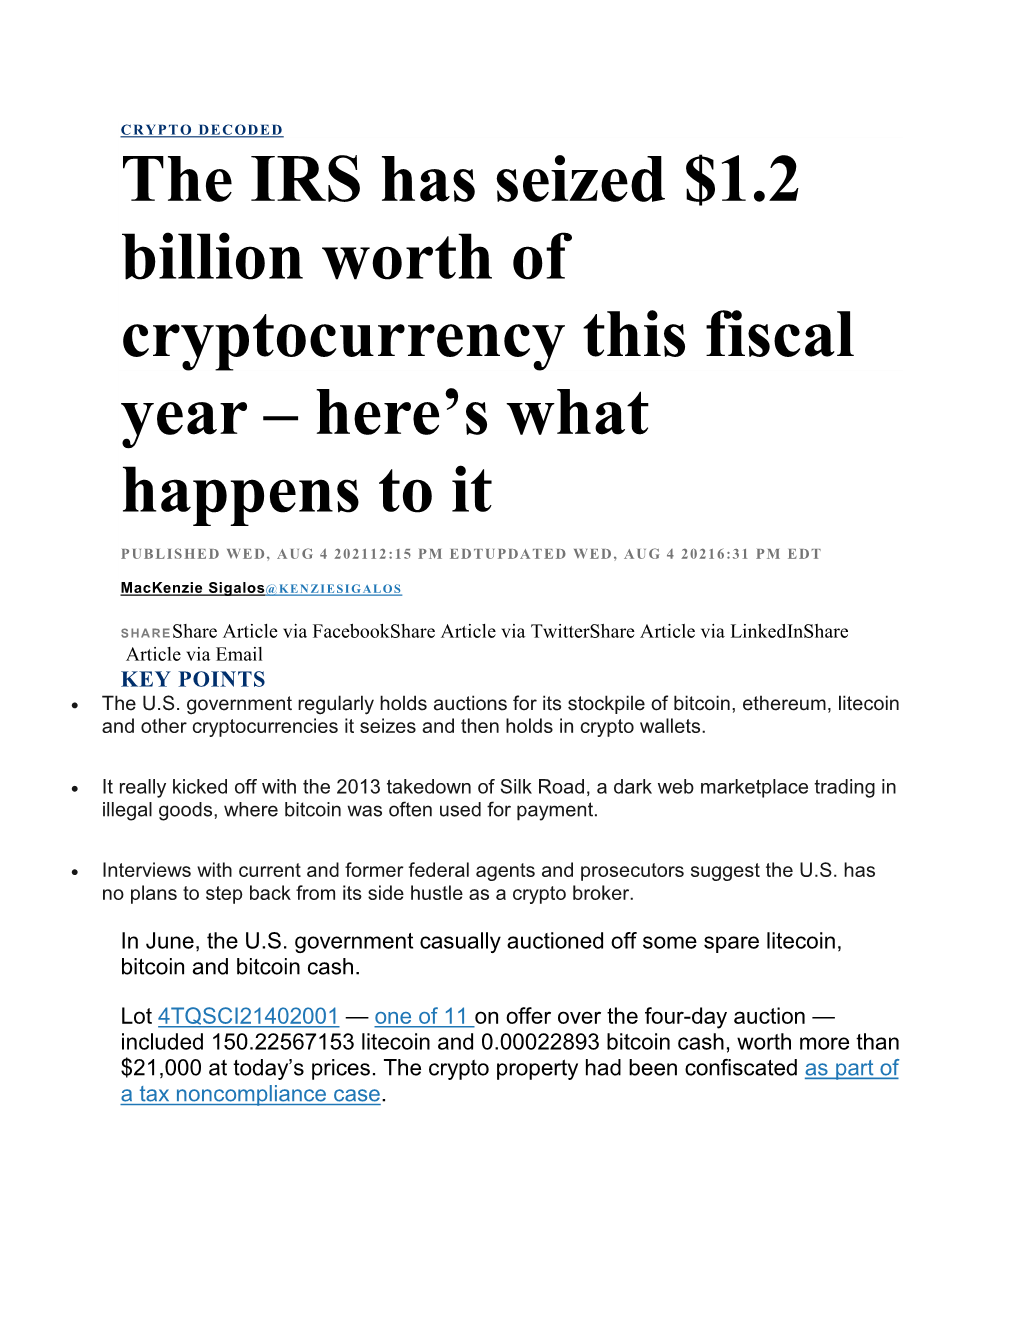 The IRS Has Seized $1.2 Billion Worth of Cryptocurrency This Fiscal Year – Here’S What Happens to It